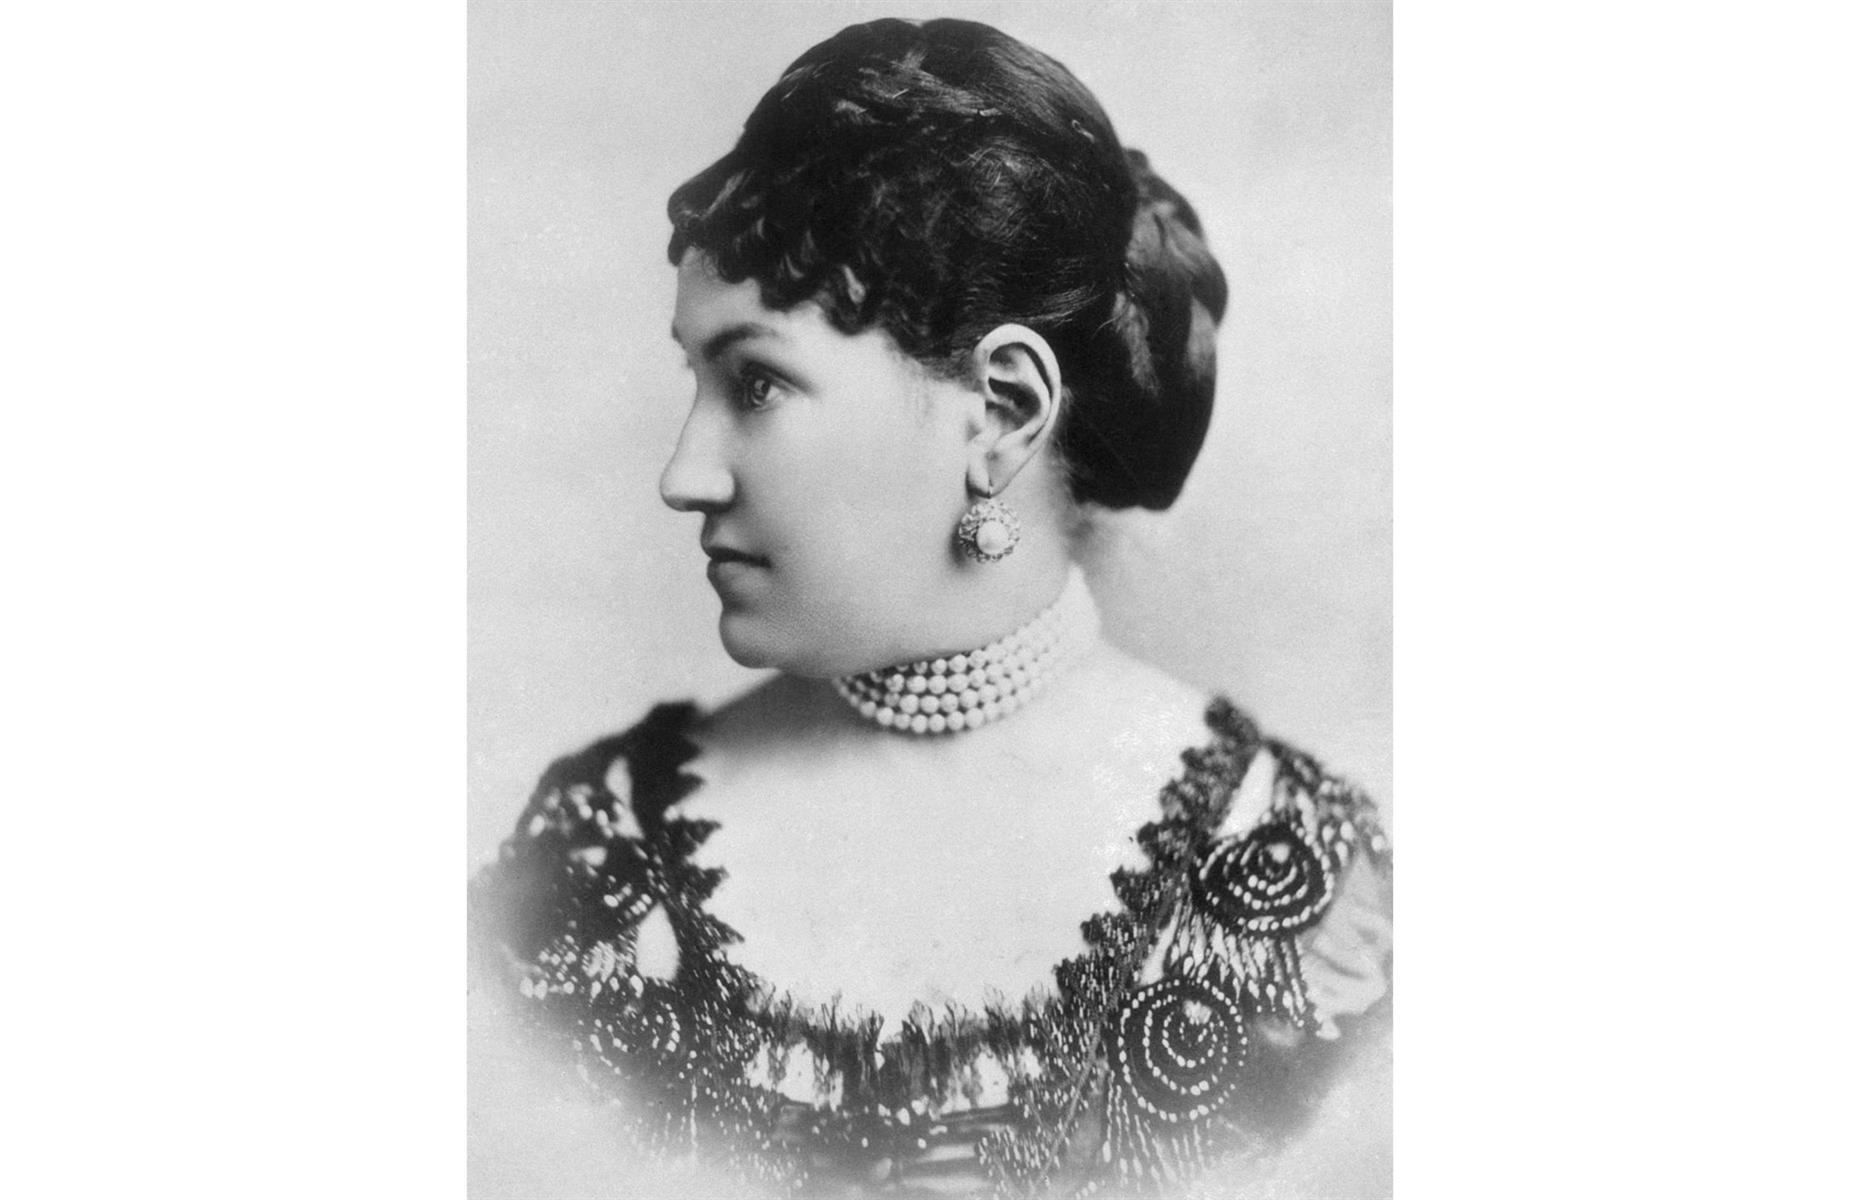 <p>One of Astor’s most prominent descendants (by marriage) was the Gilded Age society doyenne Caroline Webster Schermerhorn Asto<a href="https://www.britannica.com/biography/Caroline-Webster-Schermerhorn-Astor">r</a>, leader of New York City society’s infamous "Four Hundred", and matriarch of the male line of American Astors.</p>  <p><em>The</em> Mrs Astor, as she preferred to be known, married William Backhouse Astor Jr, John Jacob Astor’s grandson, and went on to build a substantial reputation in her own right as a hostess, socialite and self-proclaimed "gatekeeper" to New York City’s high society.</p>